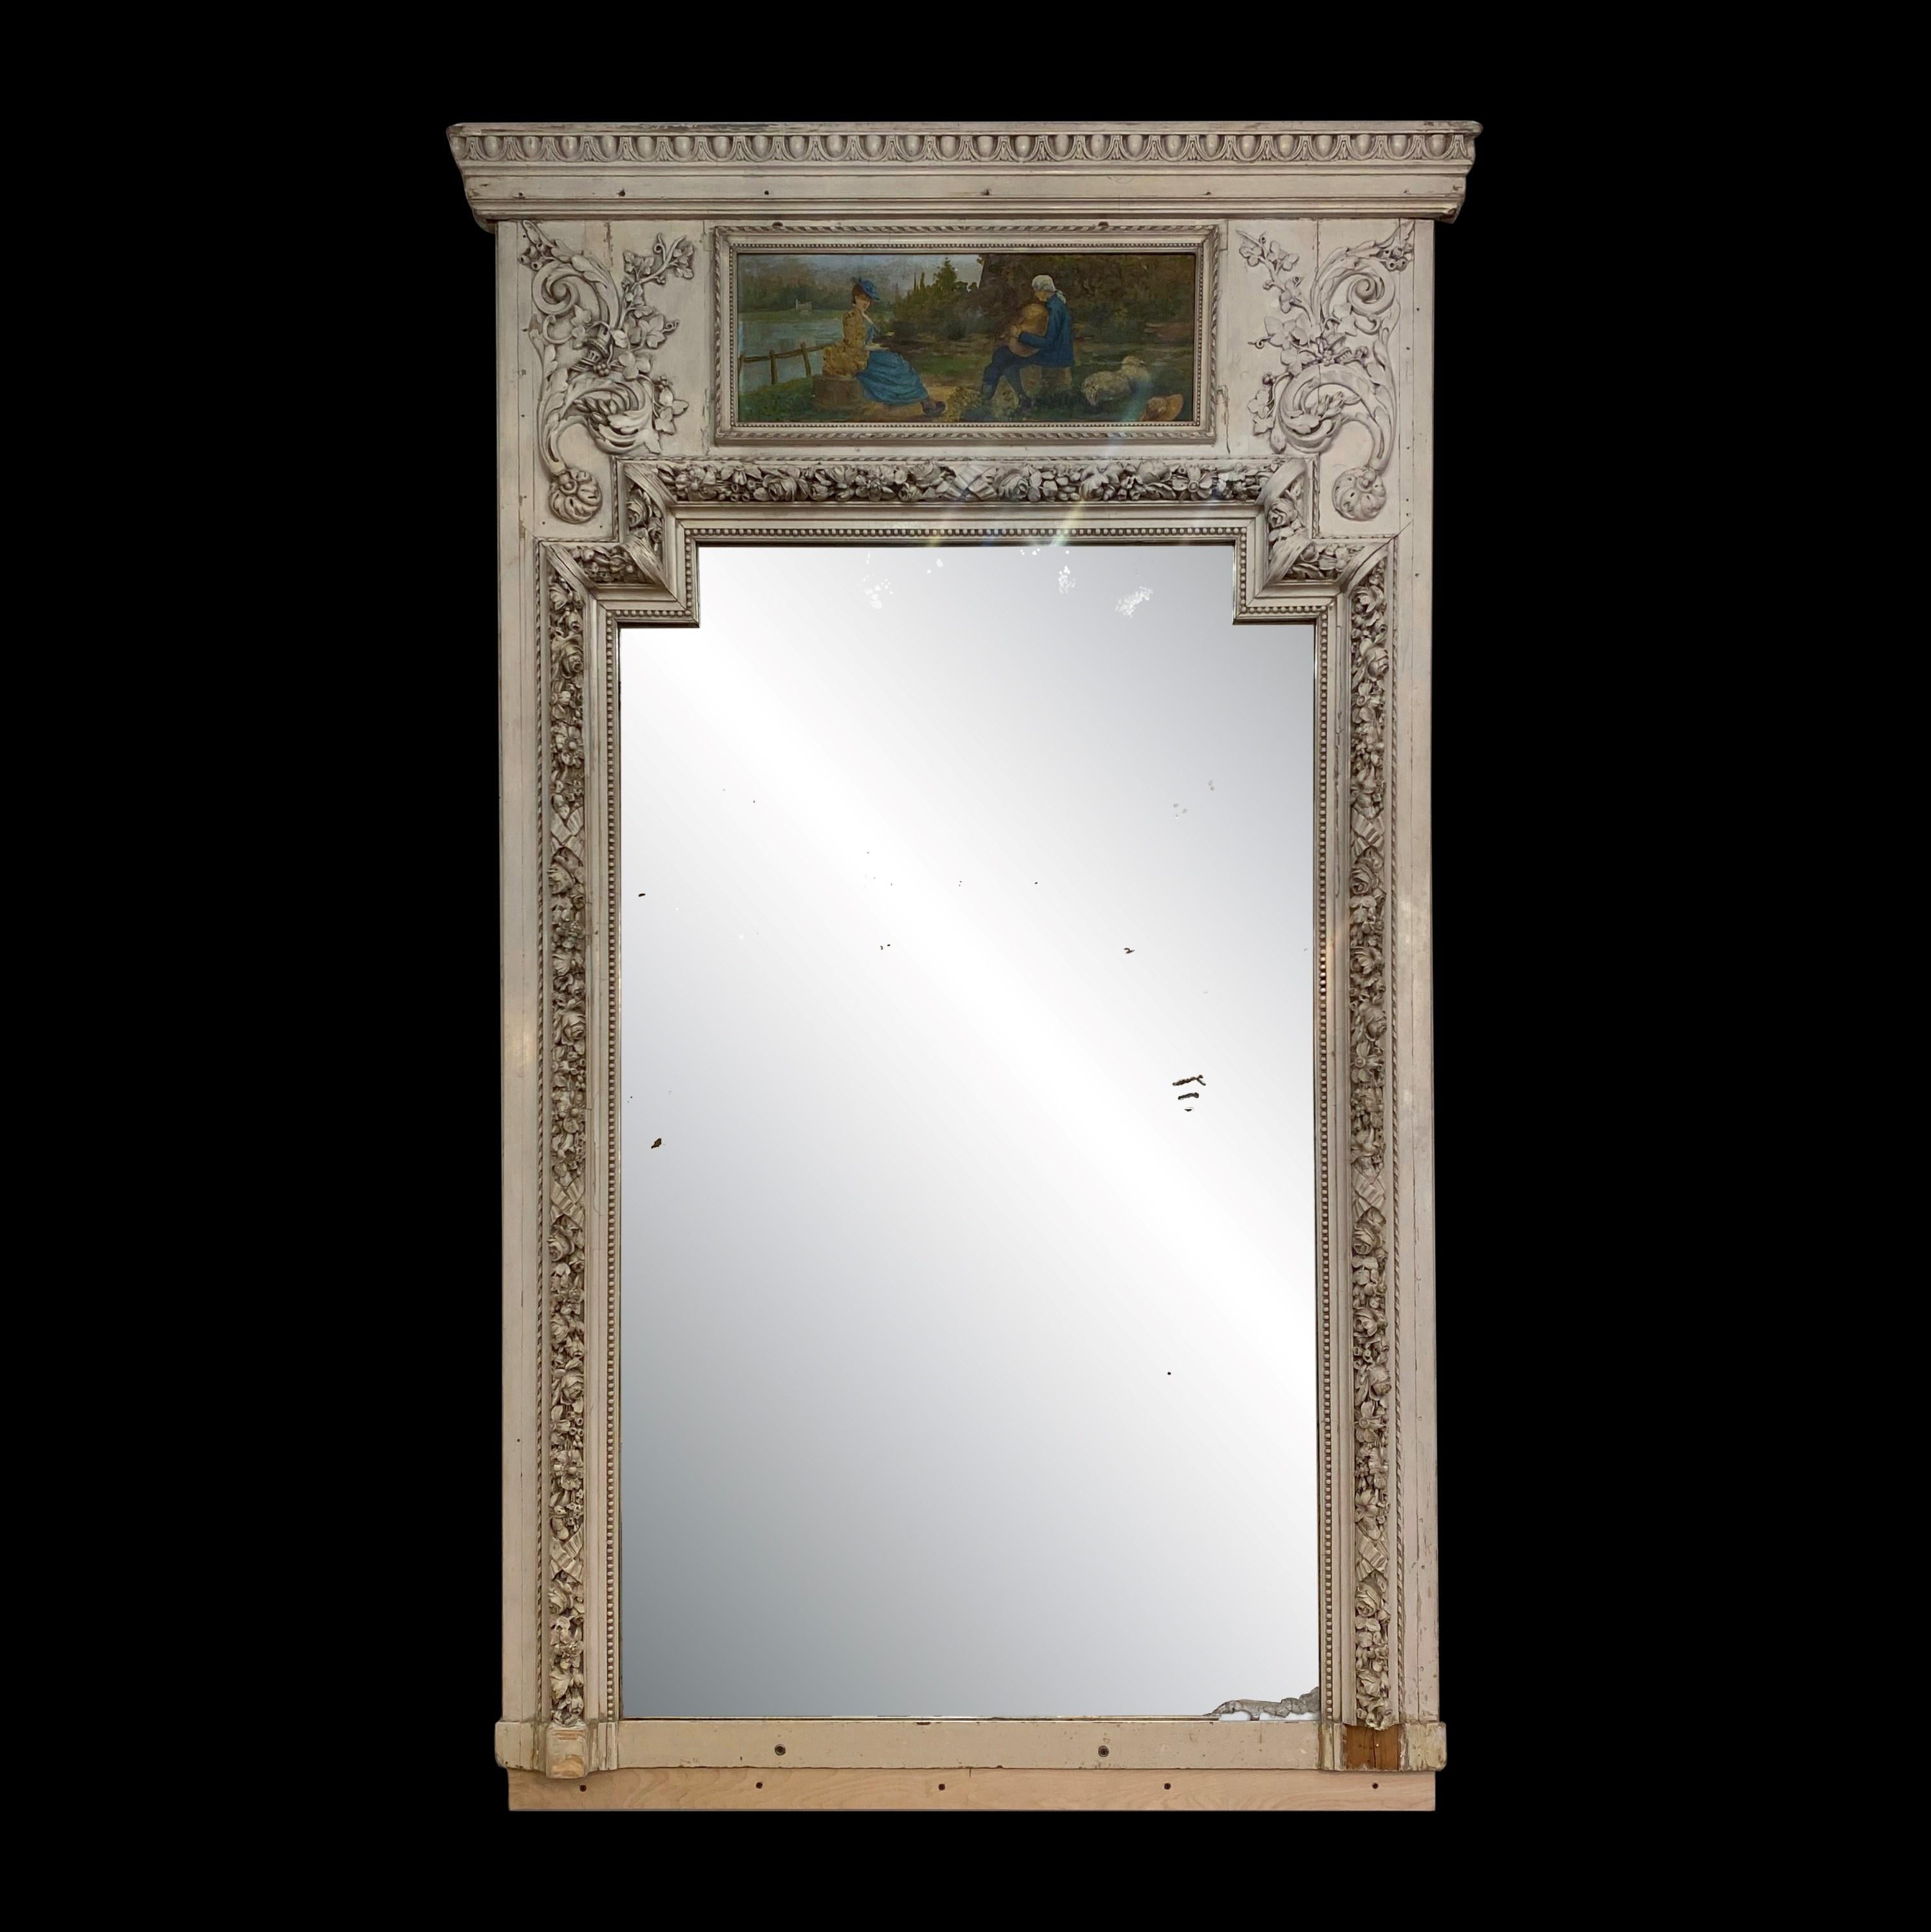 This is an exquisite antique French trumeau mirror, graced by a beautifully adorned white painted wood frame and an exquisite small painting at the top. The glass proudly bears a distinguished manufacturing date of 30 June 1899. The ornate gesso